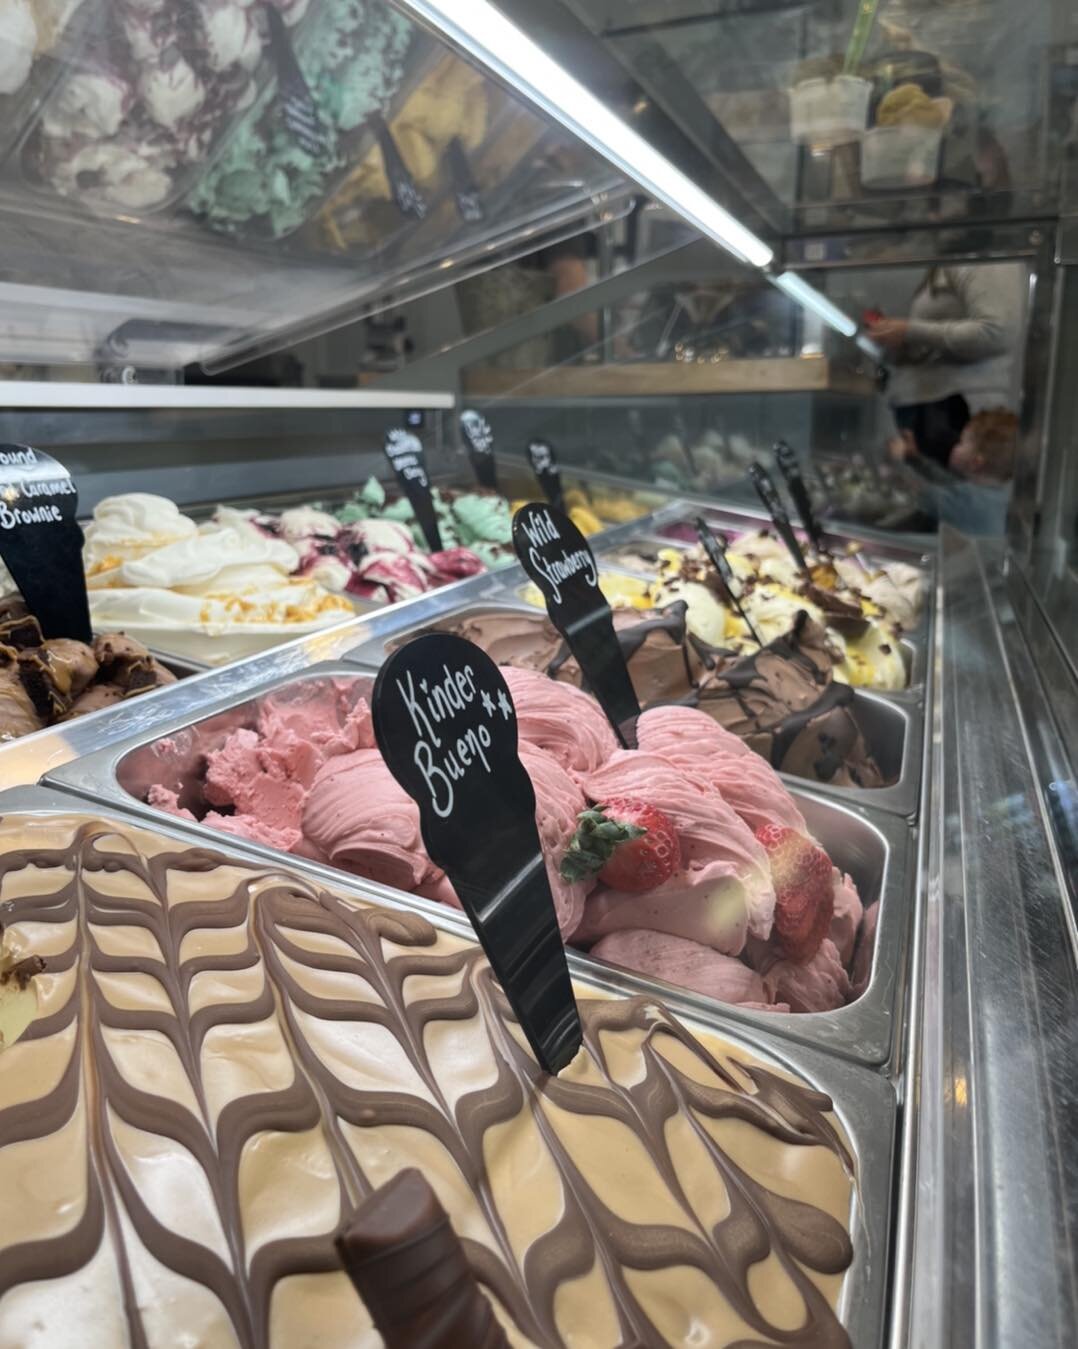 The weekend is here 🙌

Scoops upon scoops of ice cream ready for you! 

We have so many options to try 😋

We&rsquo;re open 12-5.30 today! 🍦🍦